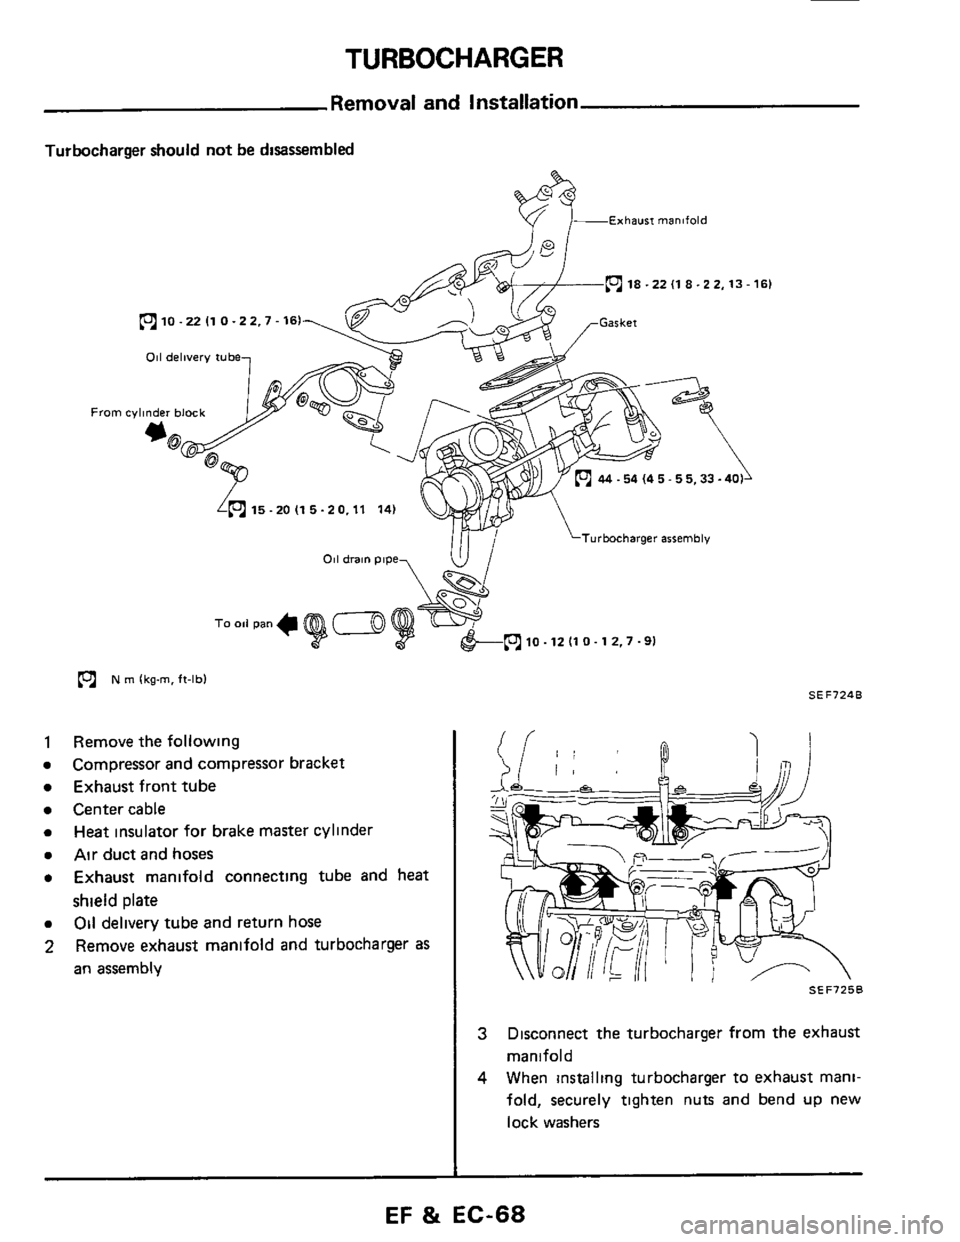 NISSAN 300ZX 1984 Z31 Engine Fuel And Emission Control System Workshop Manual TURBOCHARGER 
Removal and Installation 
Turbocharger  should not be disassembled 
&- Exhaw manifold 
(c1 18 -22 (1 8-22.13-161 
10 -22 I1 0 -22.7.161 
011 delivery tube 
From cylinder block 
*@ 
15-2O